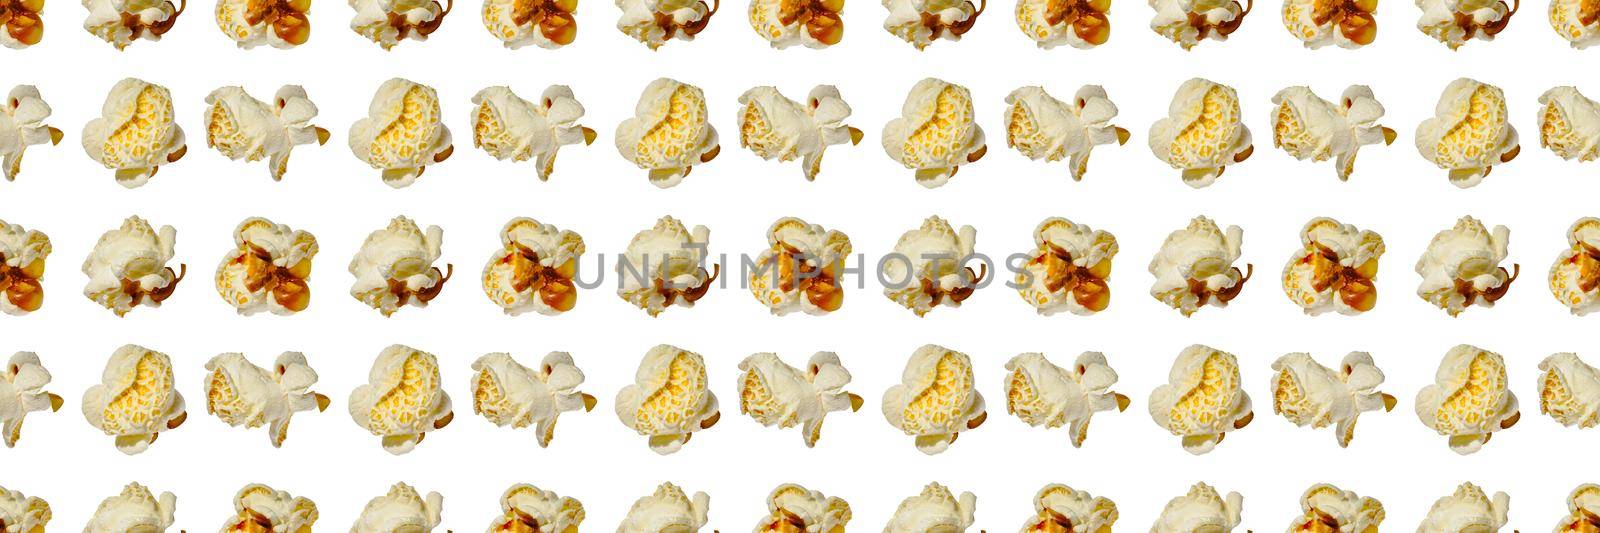 Rich collection of popcorn, isolated on white background. popcorn isolated.